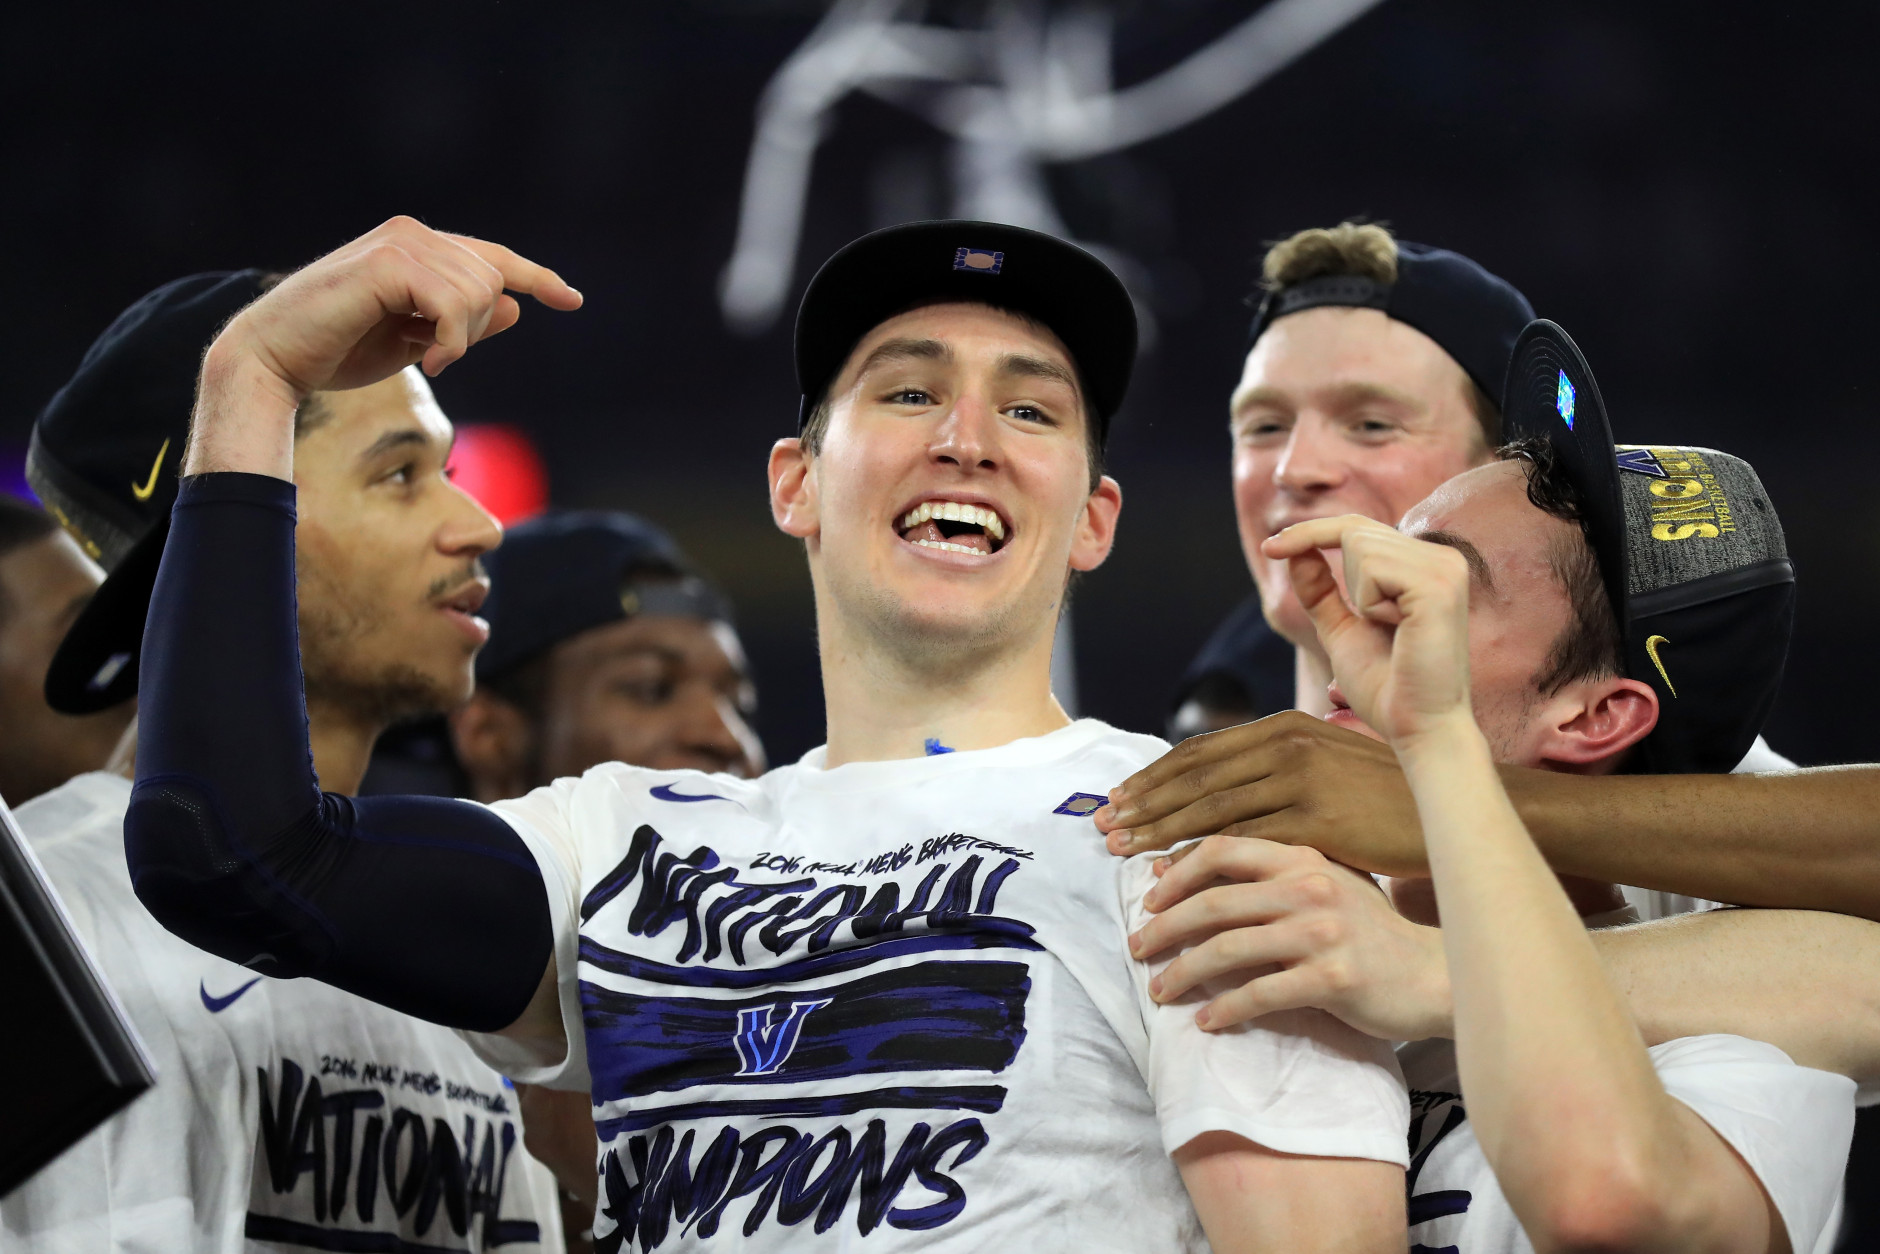 HOUSTON, TEXAS - APRIL 04:  Ryan Arcidiacono #15 of the Villanova Wildcats celebrates defeating the North Carolina Tar Heels 77-74 to win the 2016 NCAA Men's Final Four National Championship game at NRG Stadium on April 4, 2016 in Houston, Texas.  (Photo by Ronald Martinez/Getty Images)